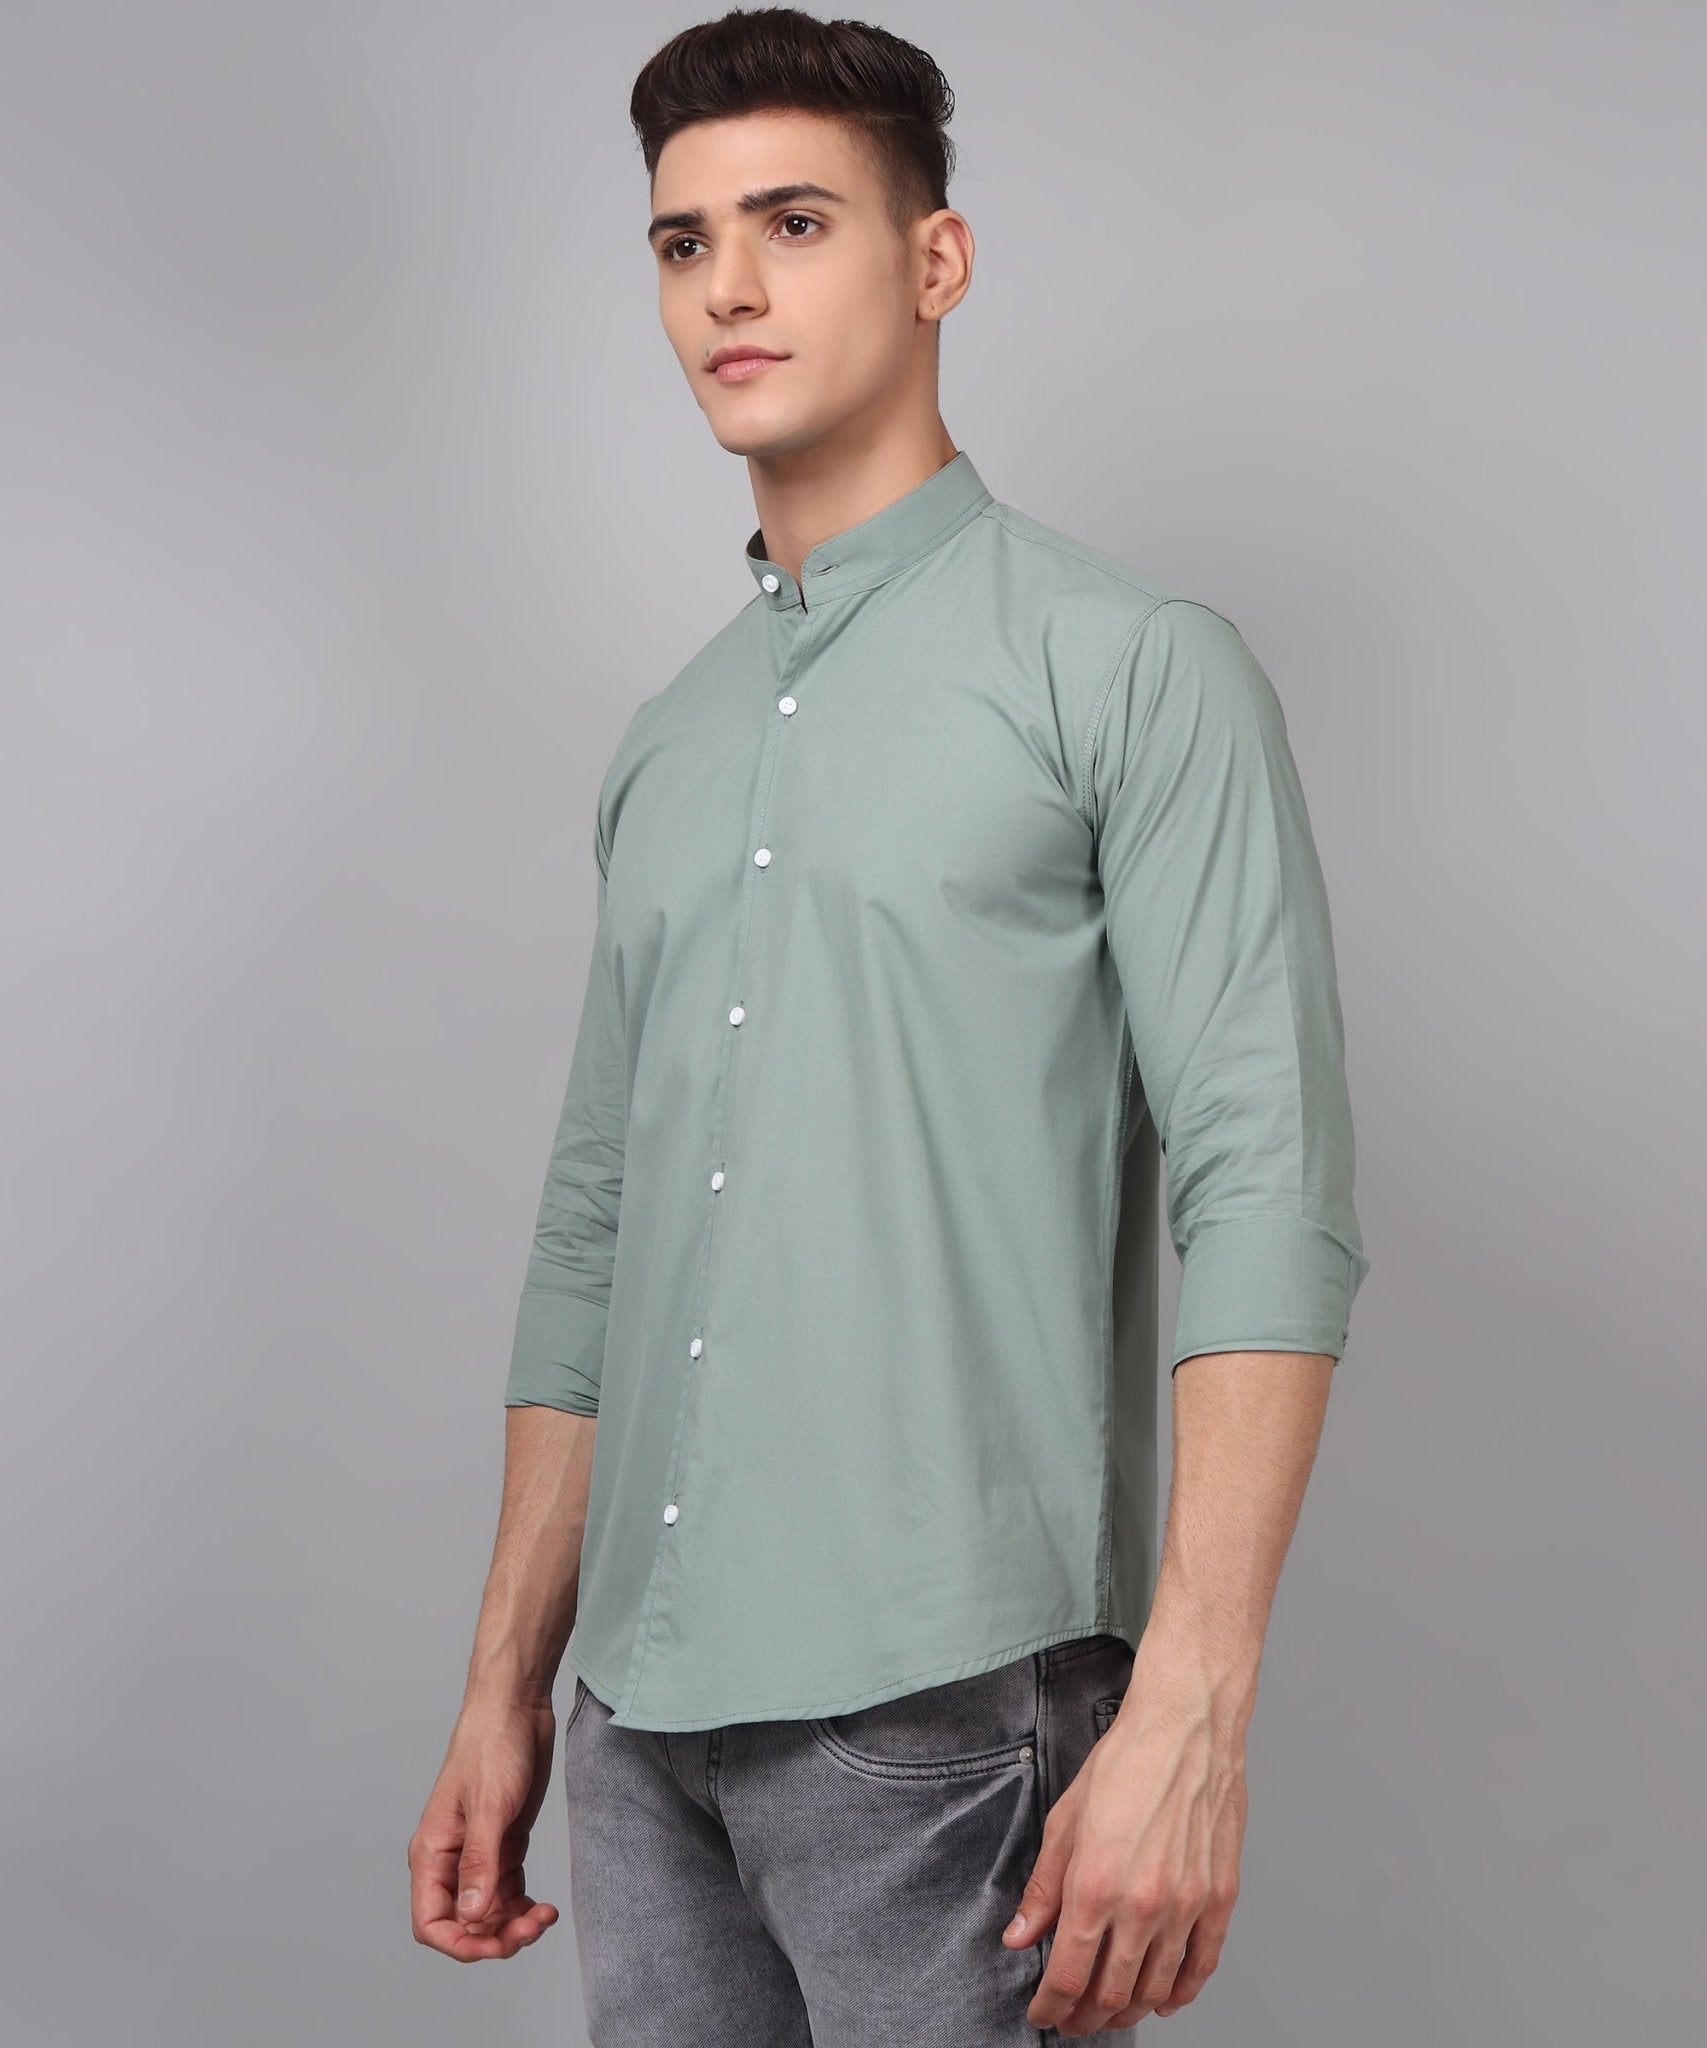 Trybuy Premium Fashionable Cotton Casual Solid Ocean Green Shirt for Men - TryBuy® USA🇺🇸